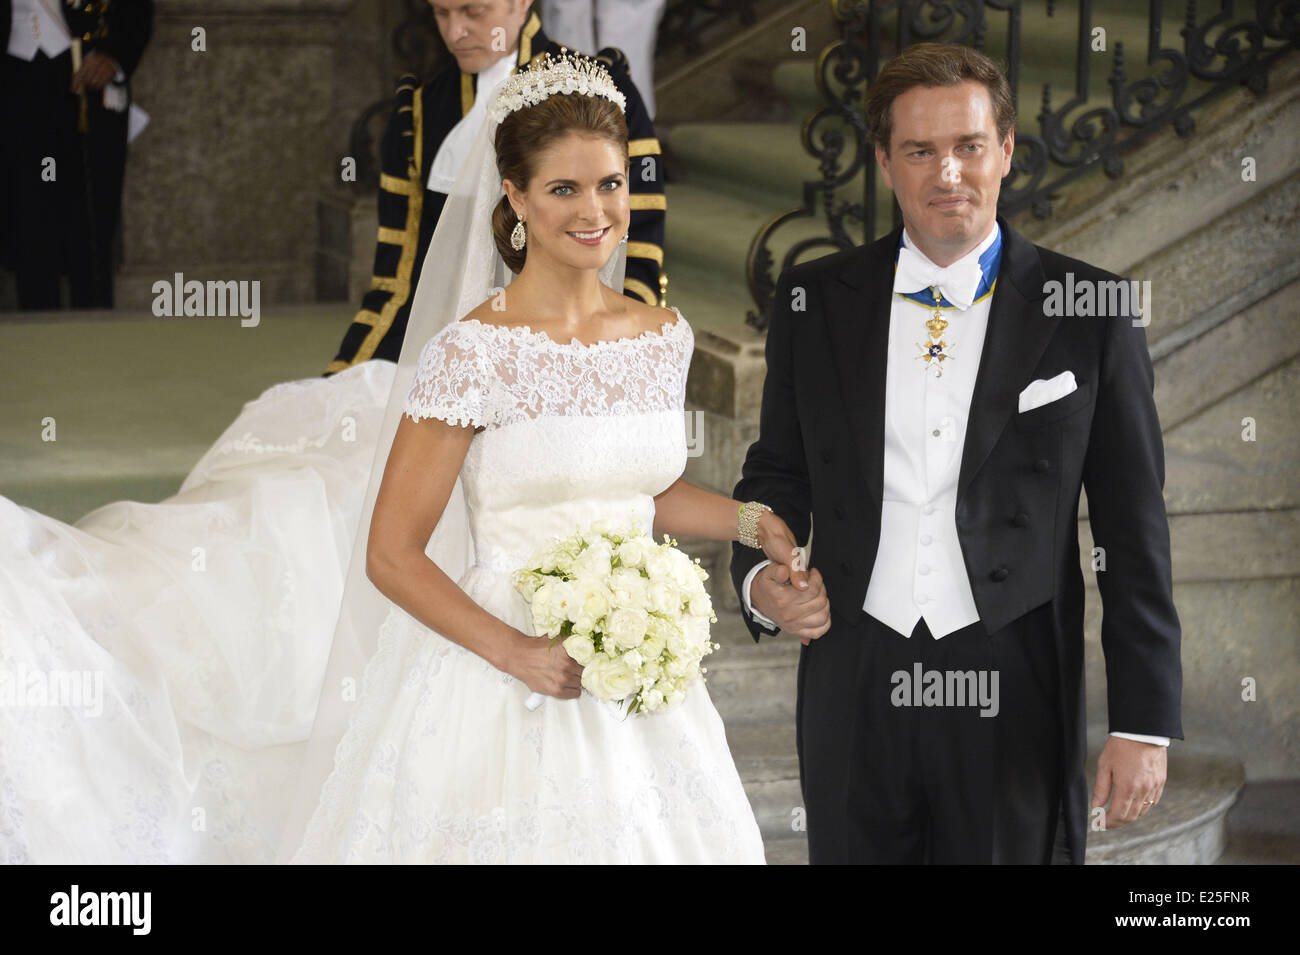 The wedding of Princess Madeleine of Sweden and Christopher O'Neill hosted by King Carl Gustaf XIV and Queen Silvia at The Royal Palace  Where: Stockholm, Sweden When: 08 Jun 2013 Stock Photo